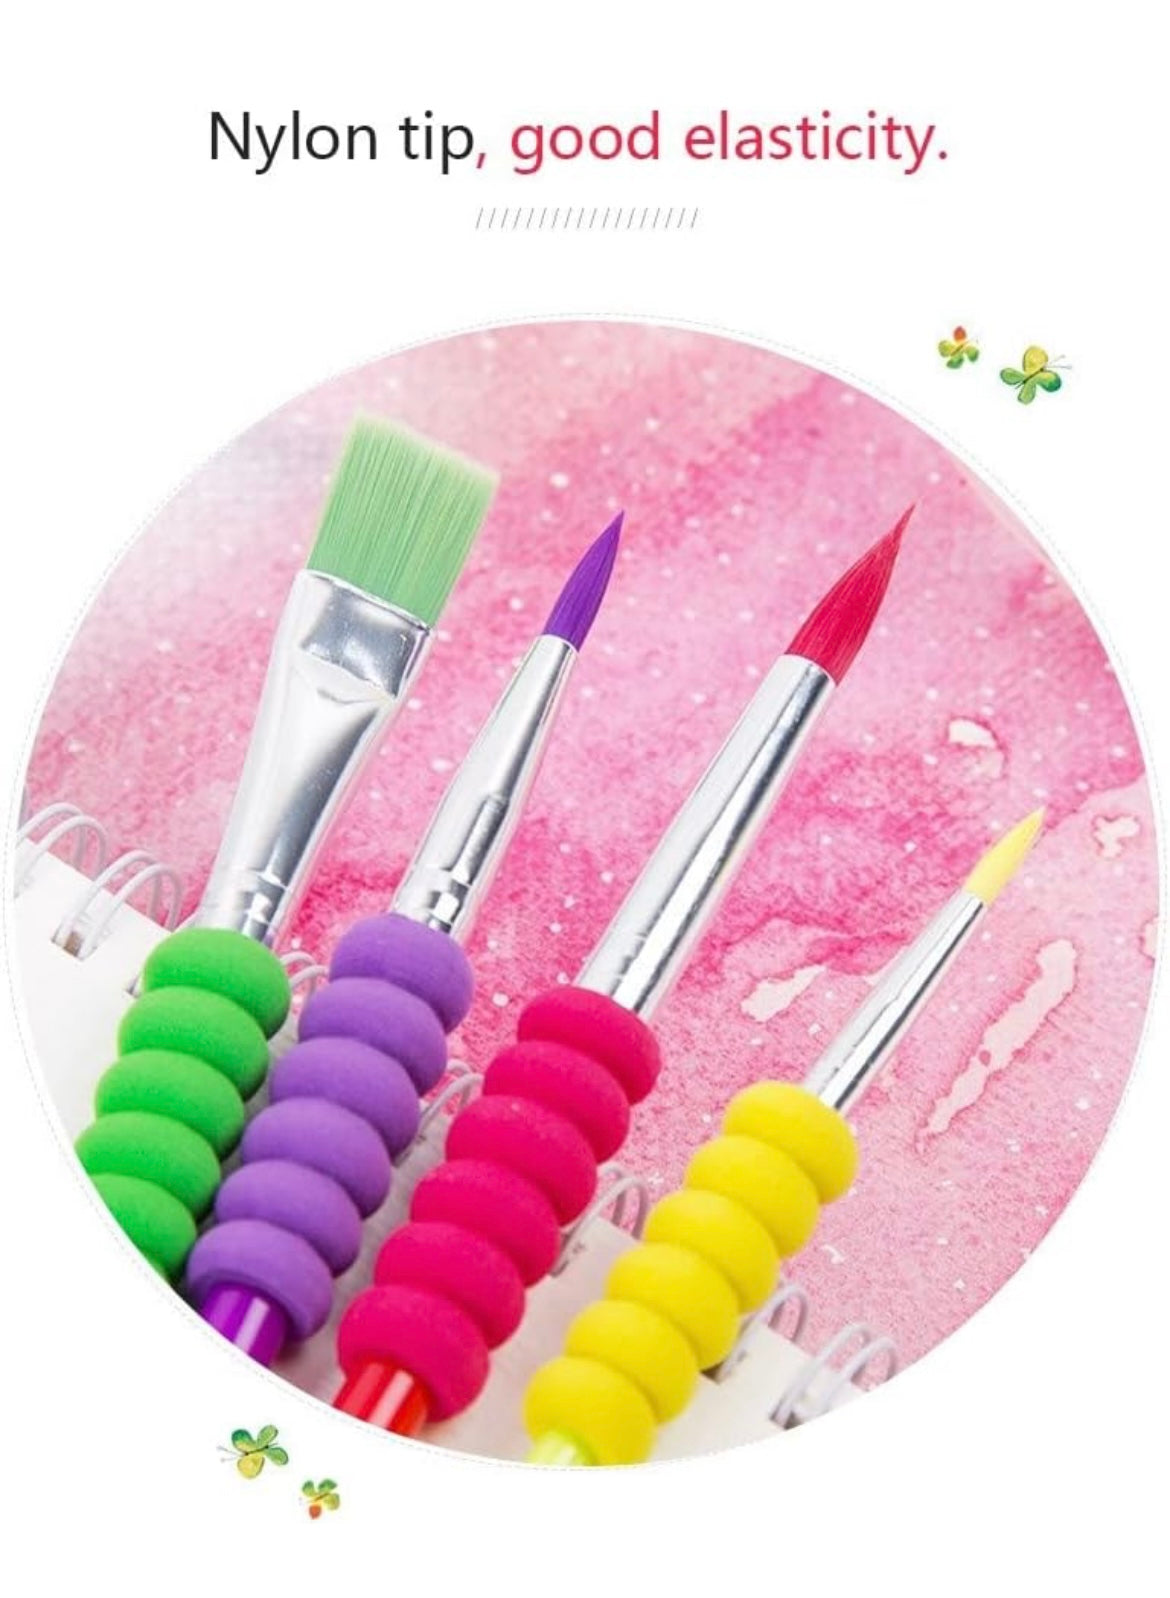 Soft grip paint brushes